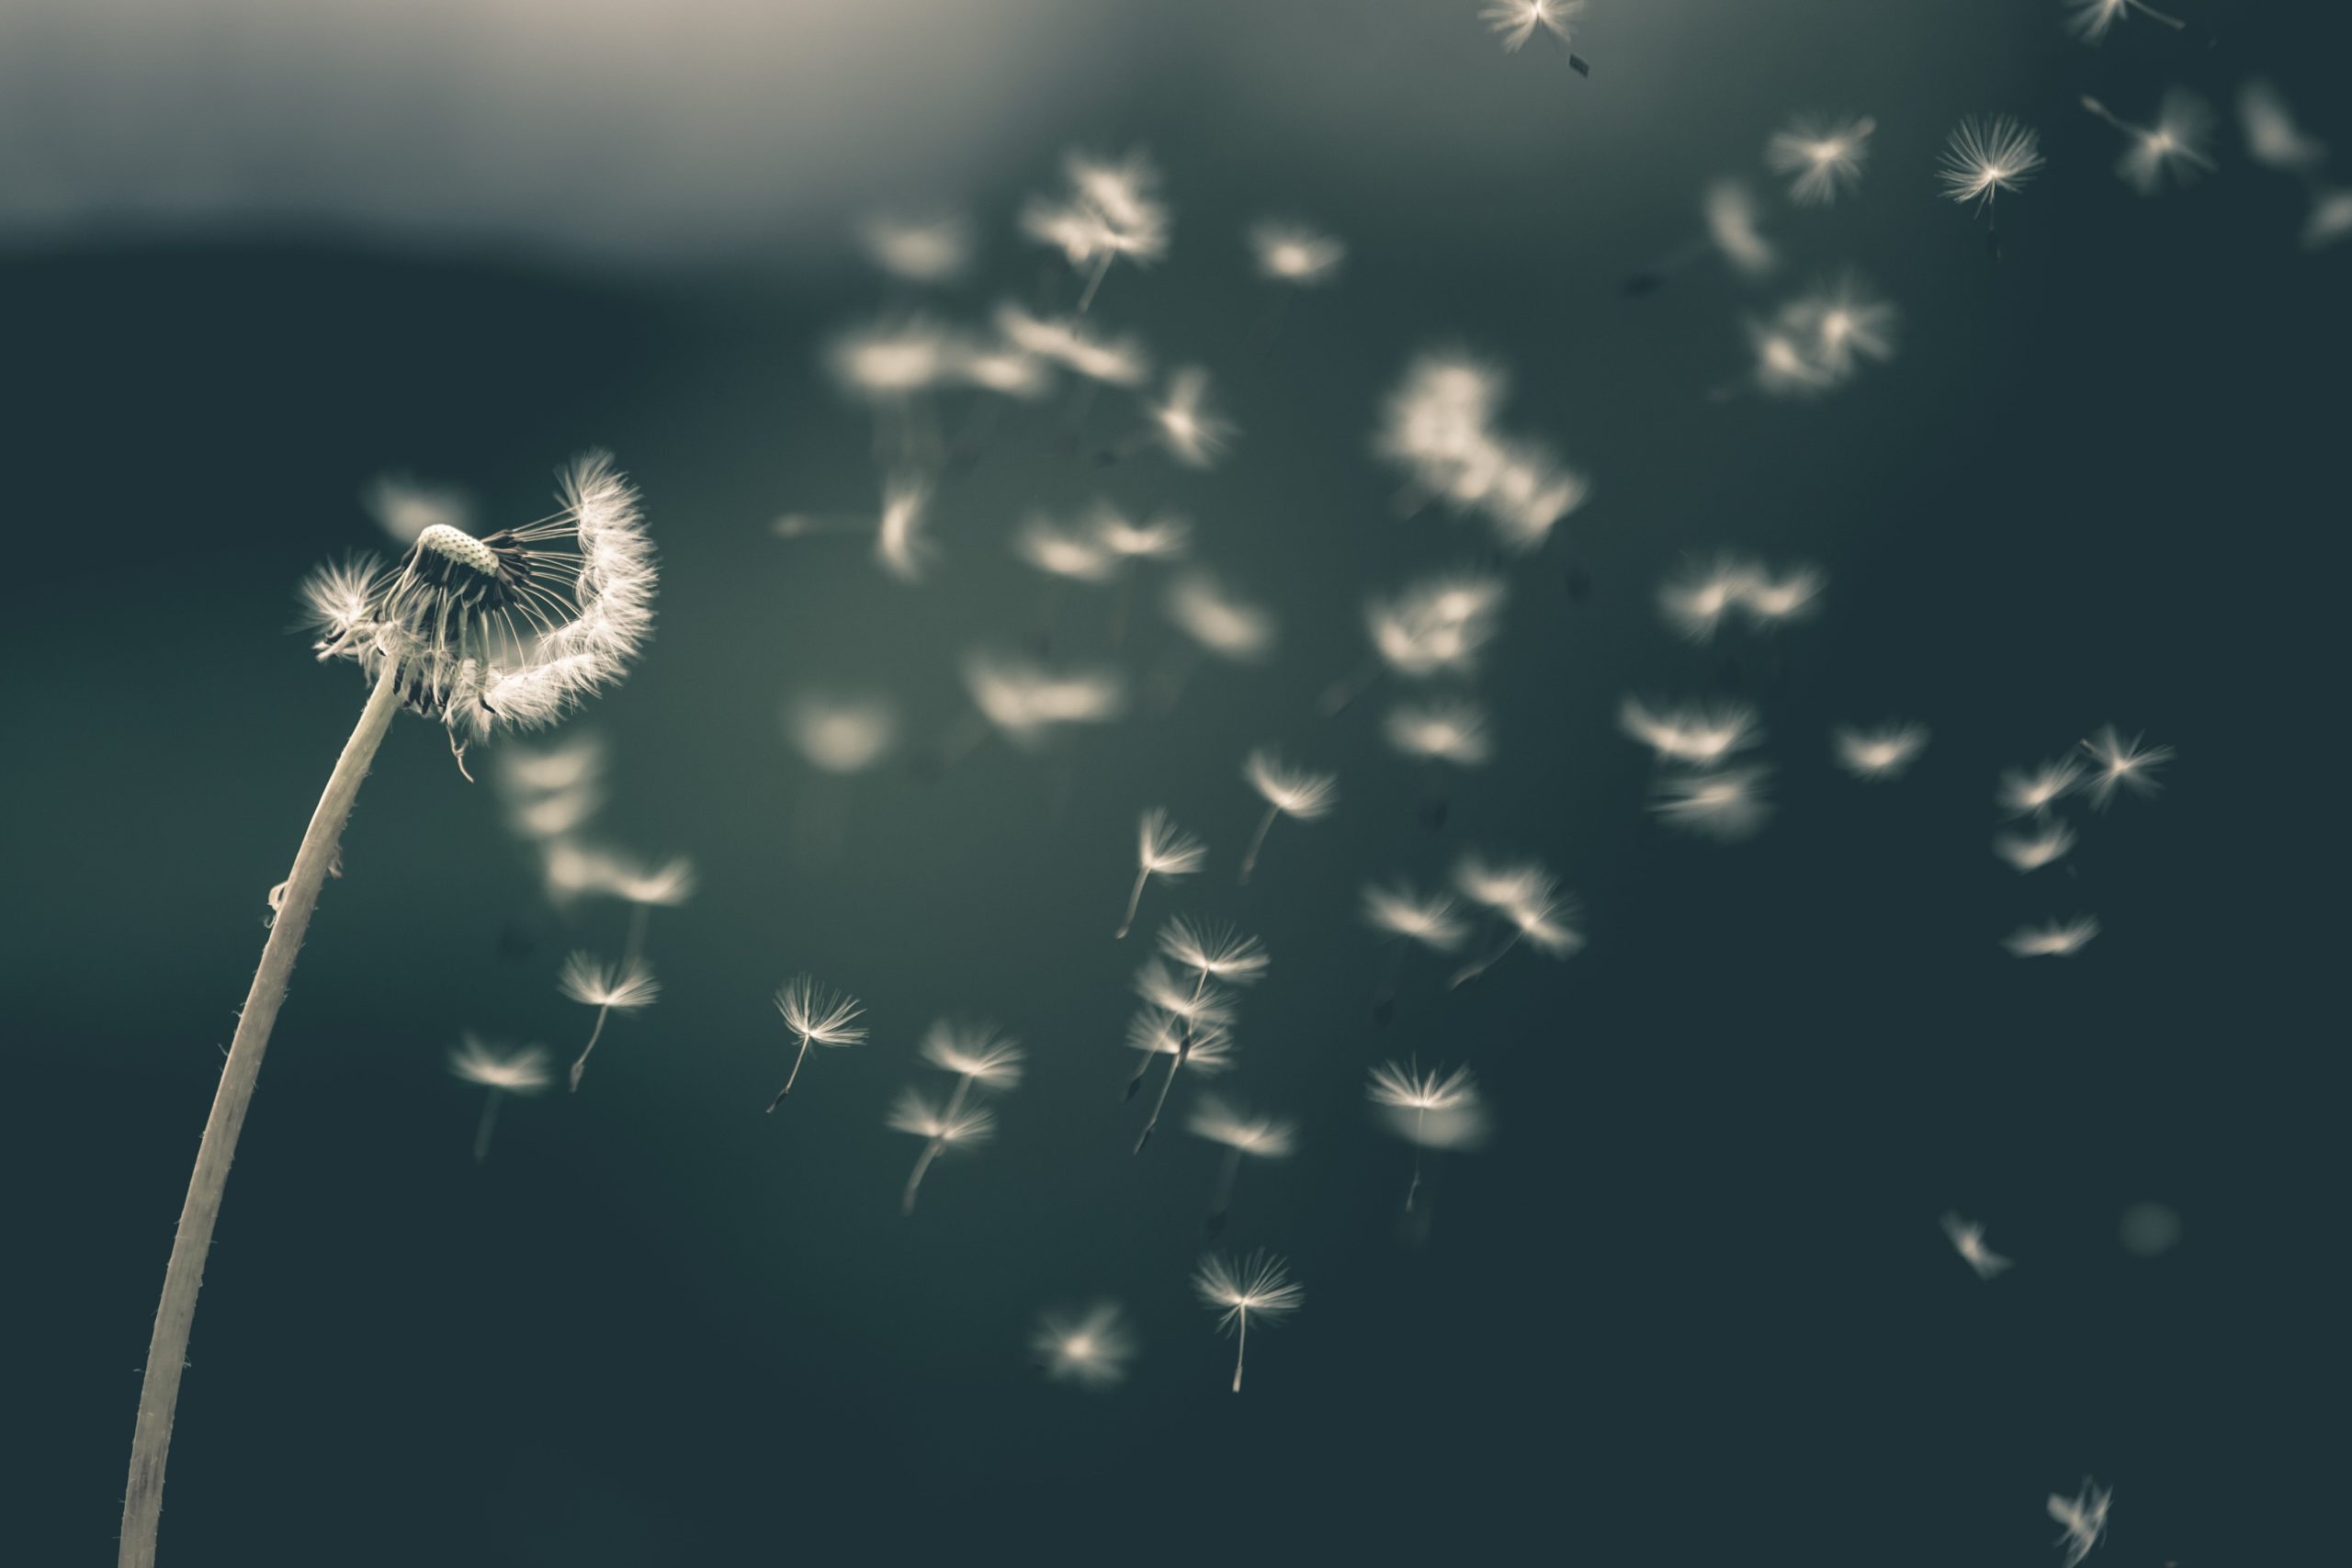 A dandelion whose seeds are blowing in the wind.